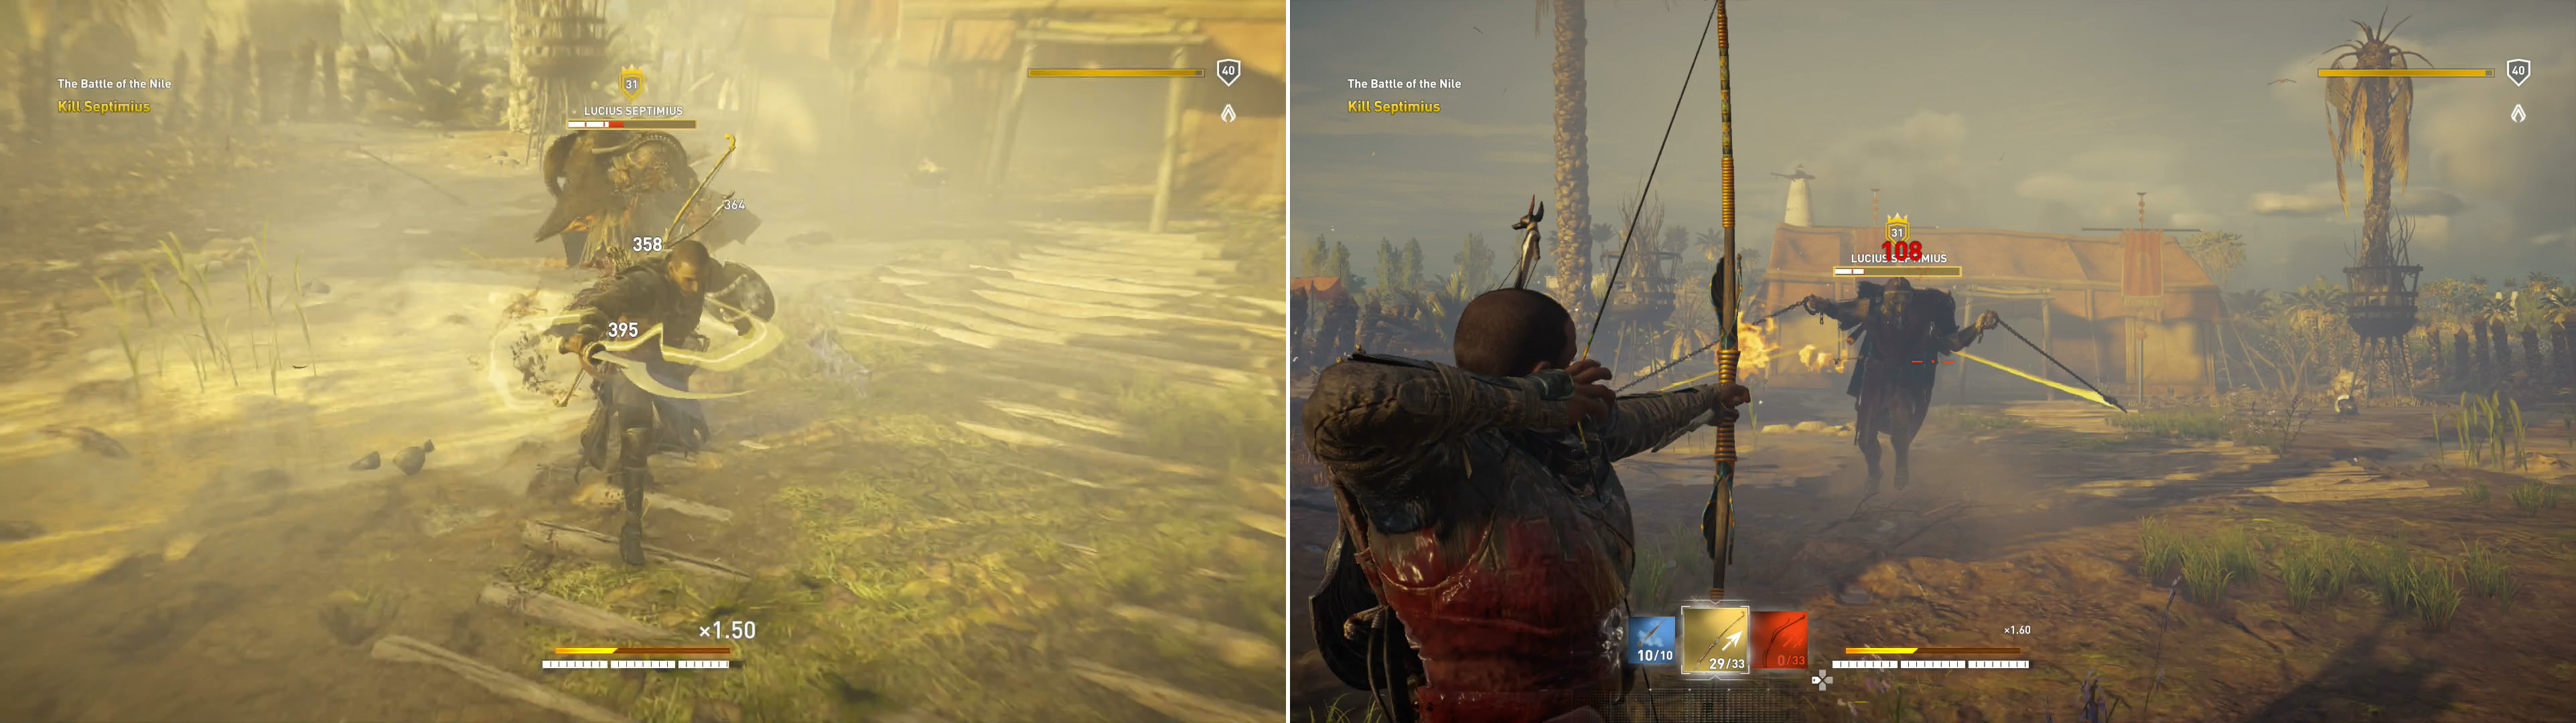 Use Overpower attacks to deal big damage (left). Septimius has limited ability to respond to ranged attacks (right)